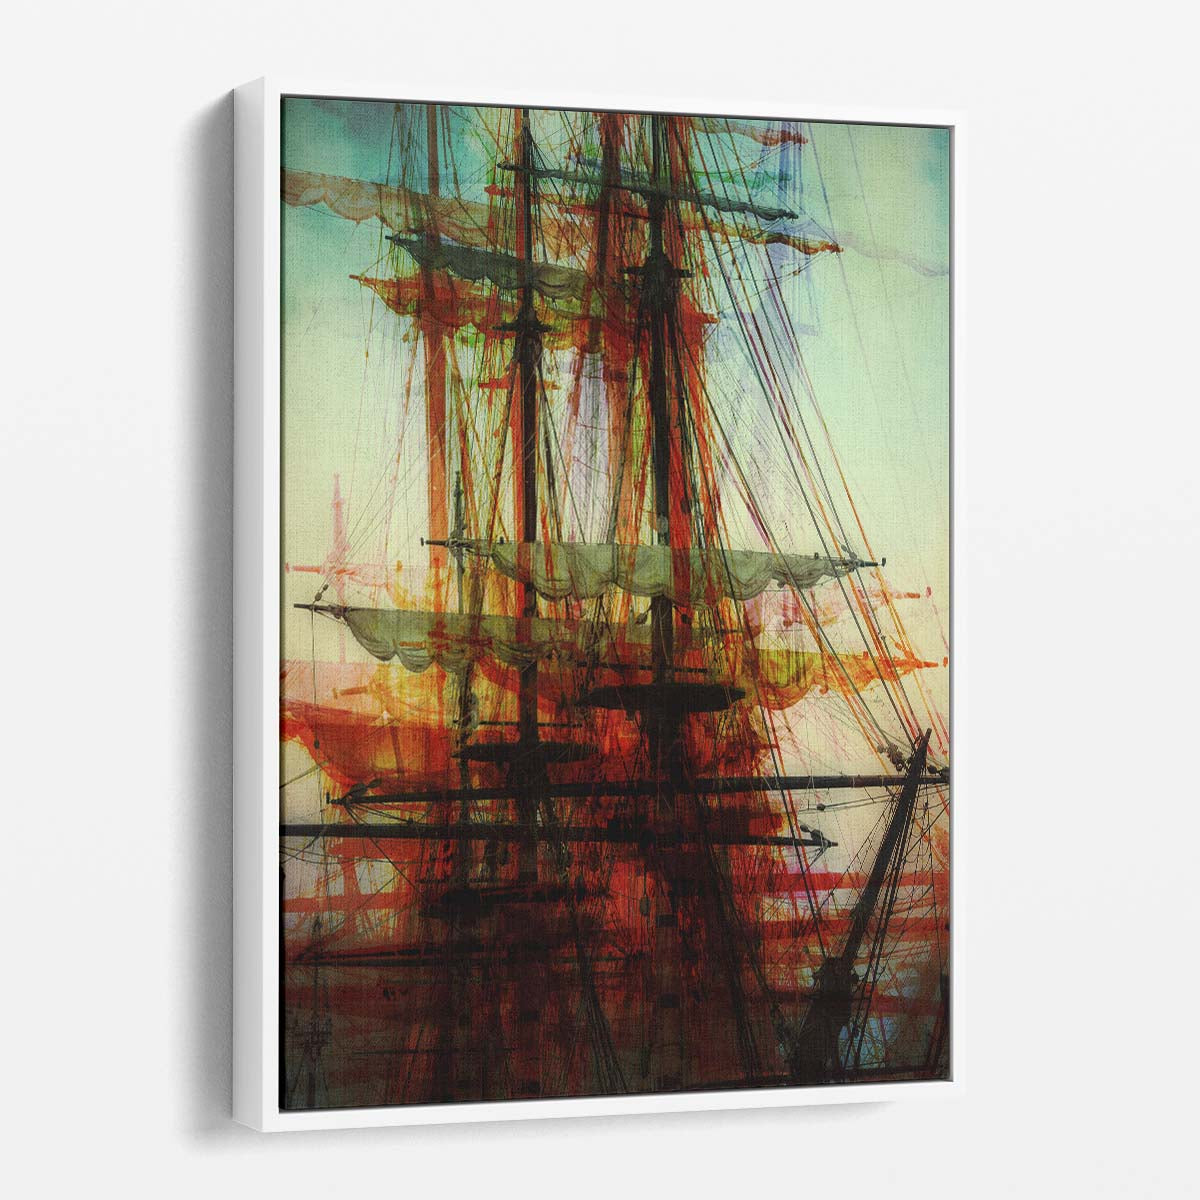 Vintage Nautical Photography Art - Abstract Sailing Boat, California by Luxuriance Designs, made in USA